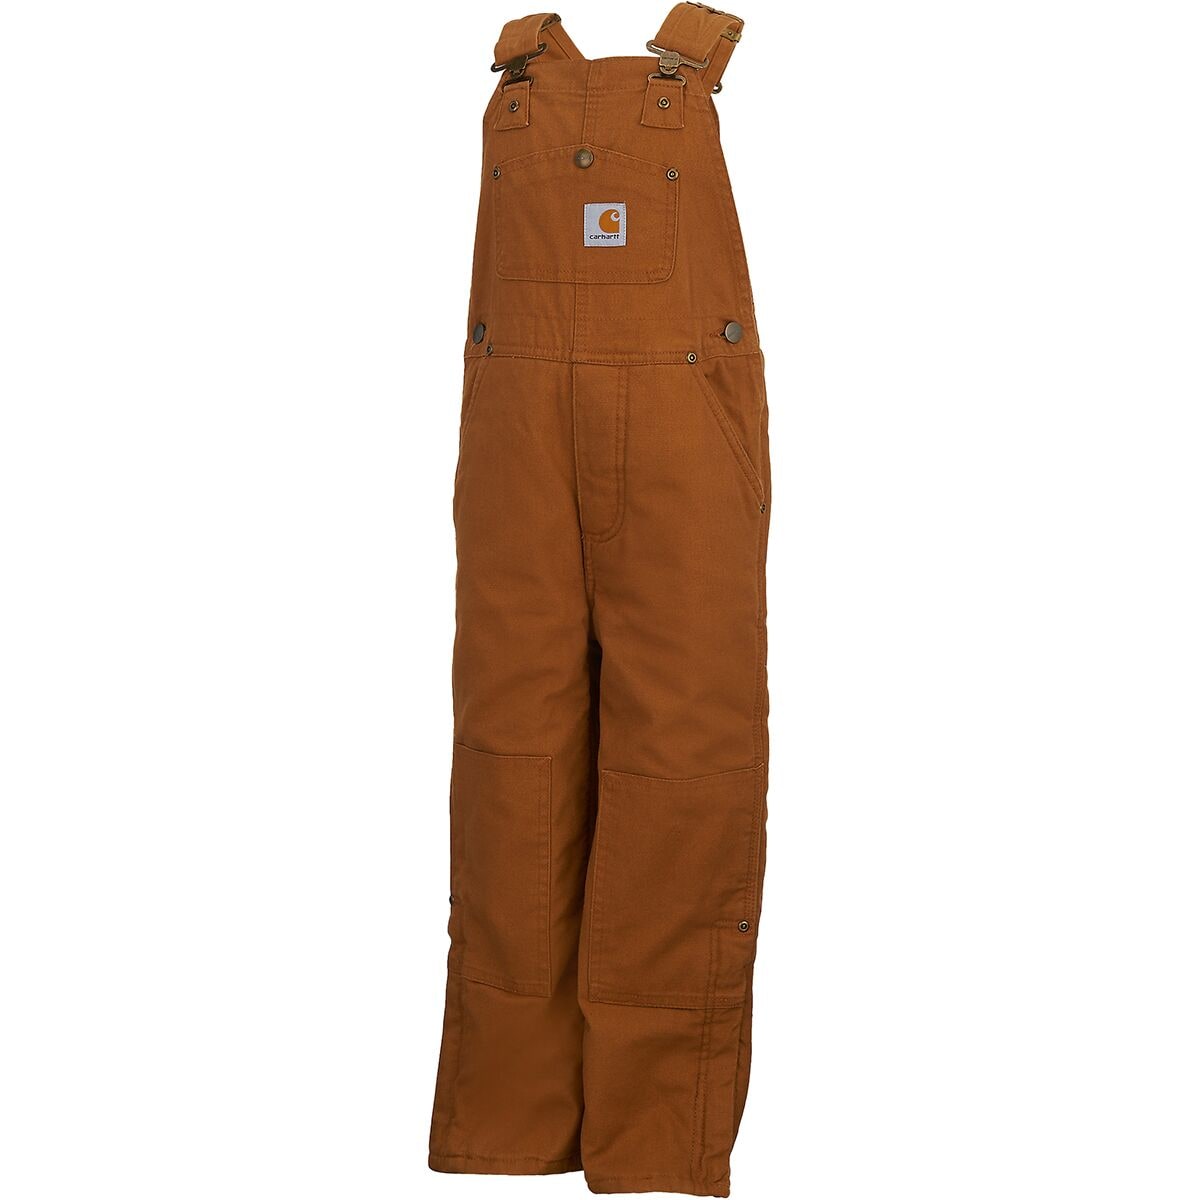 Carhartt Canvas Quilted Lined Overall Pant - Toddler Boys'